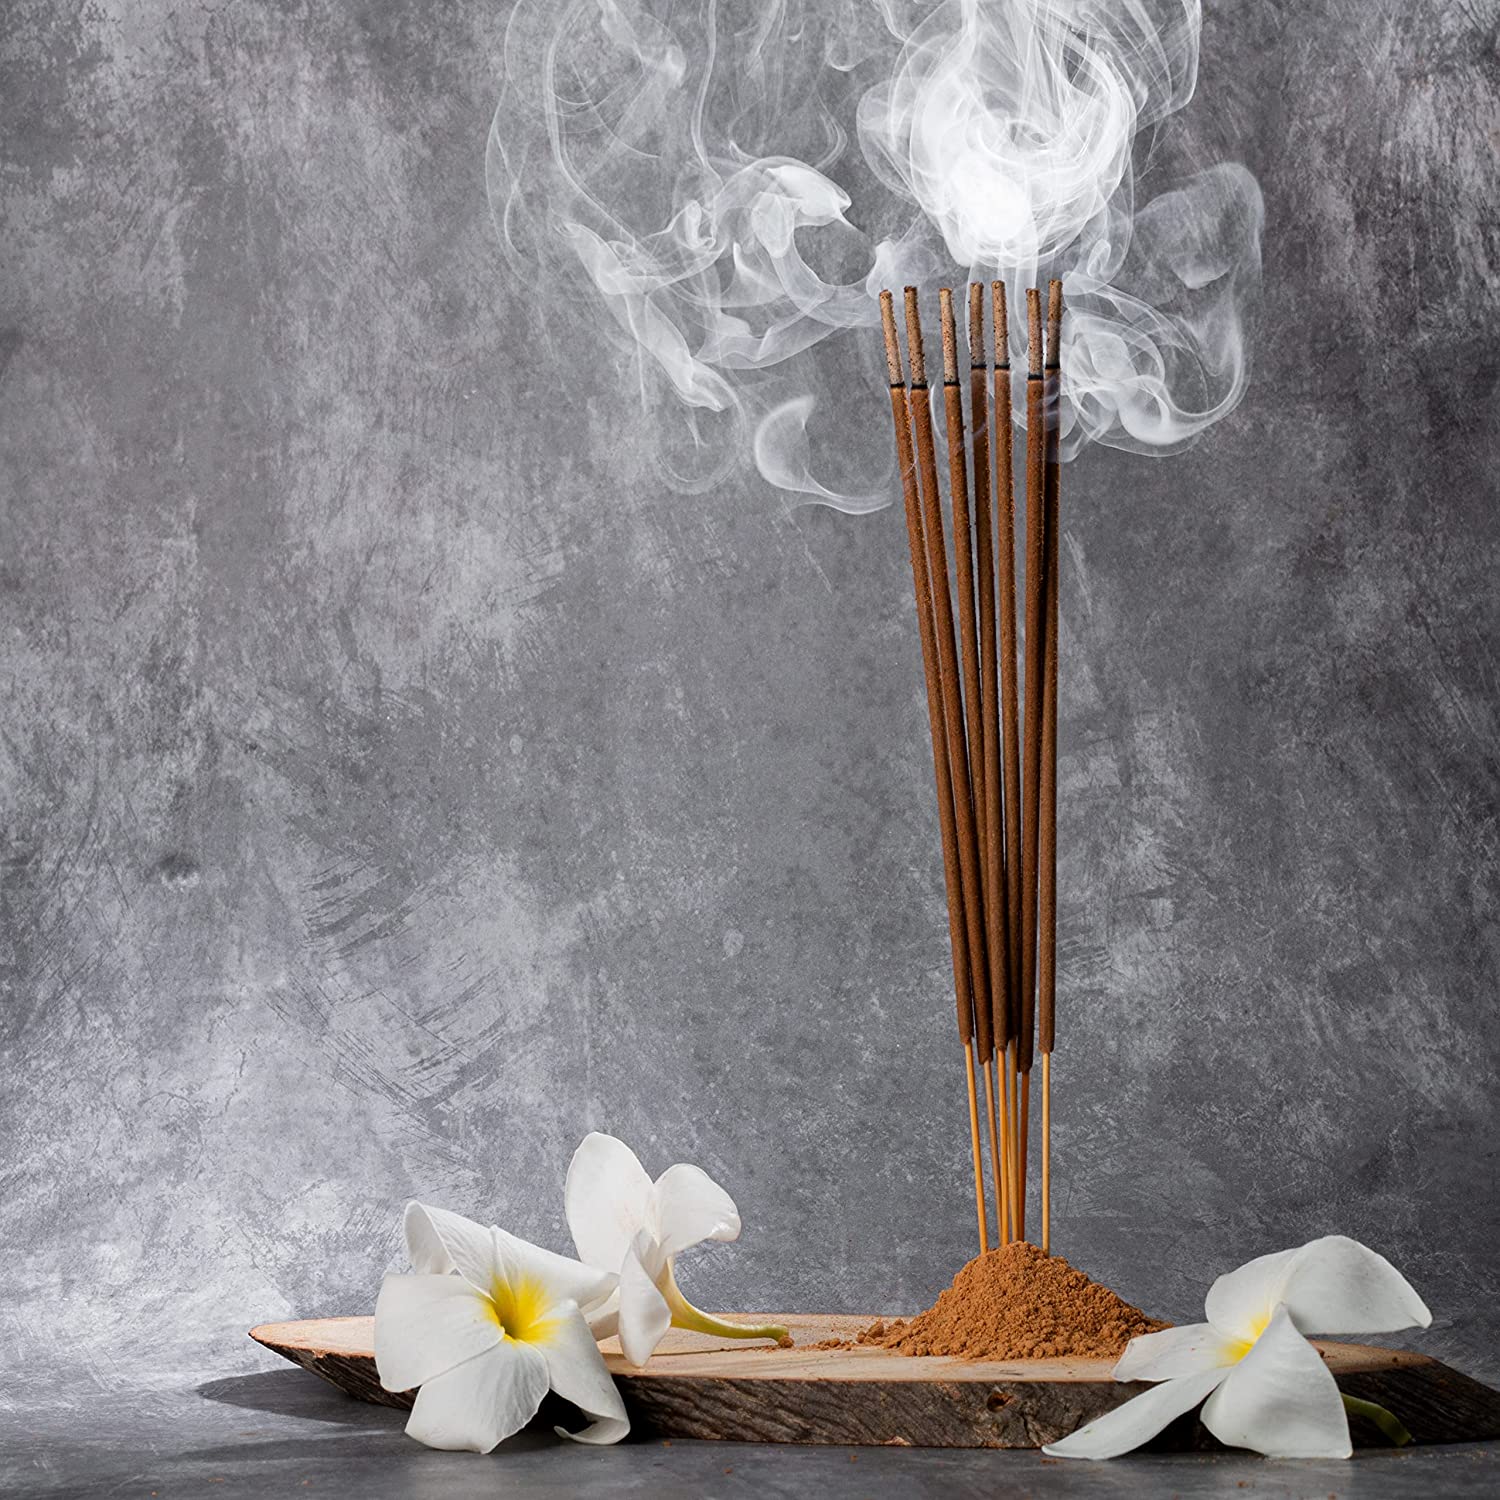 Incense Creating a Calm Space